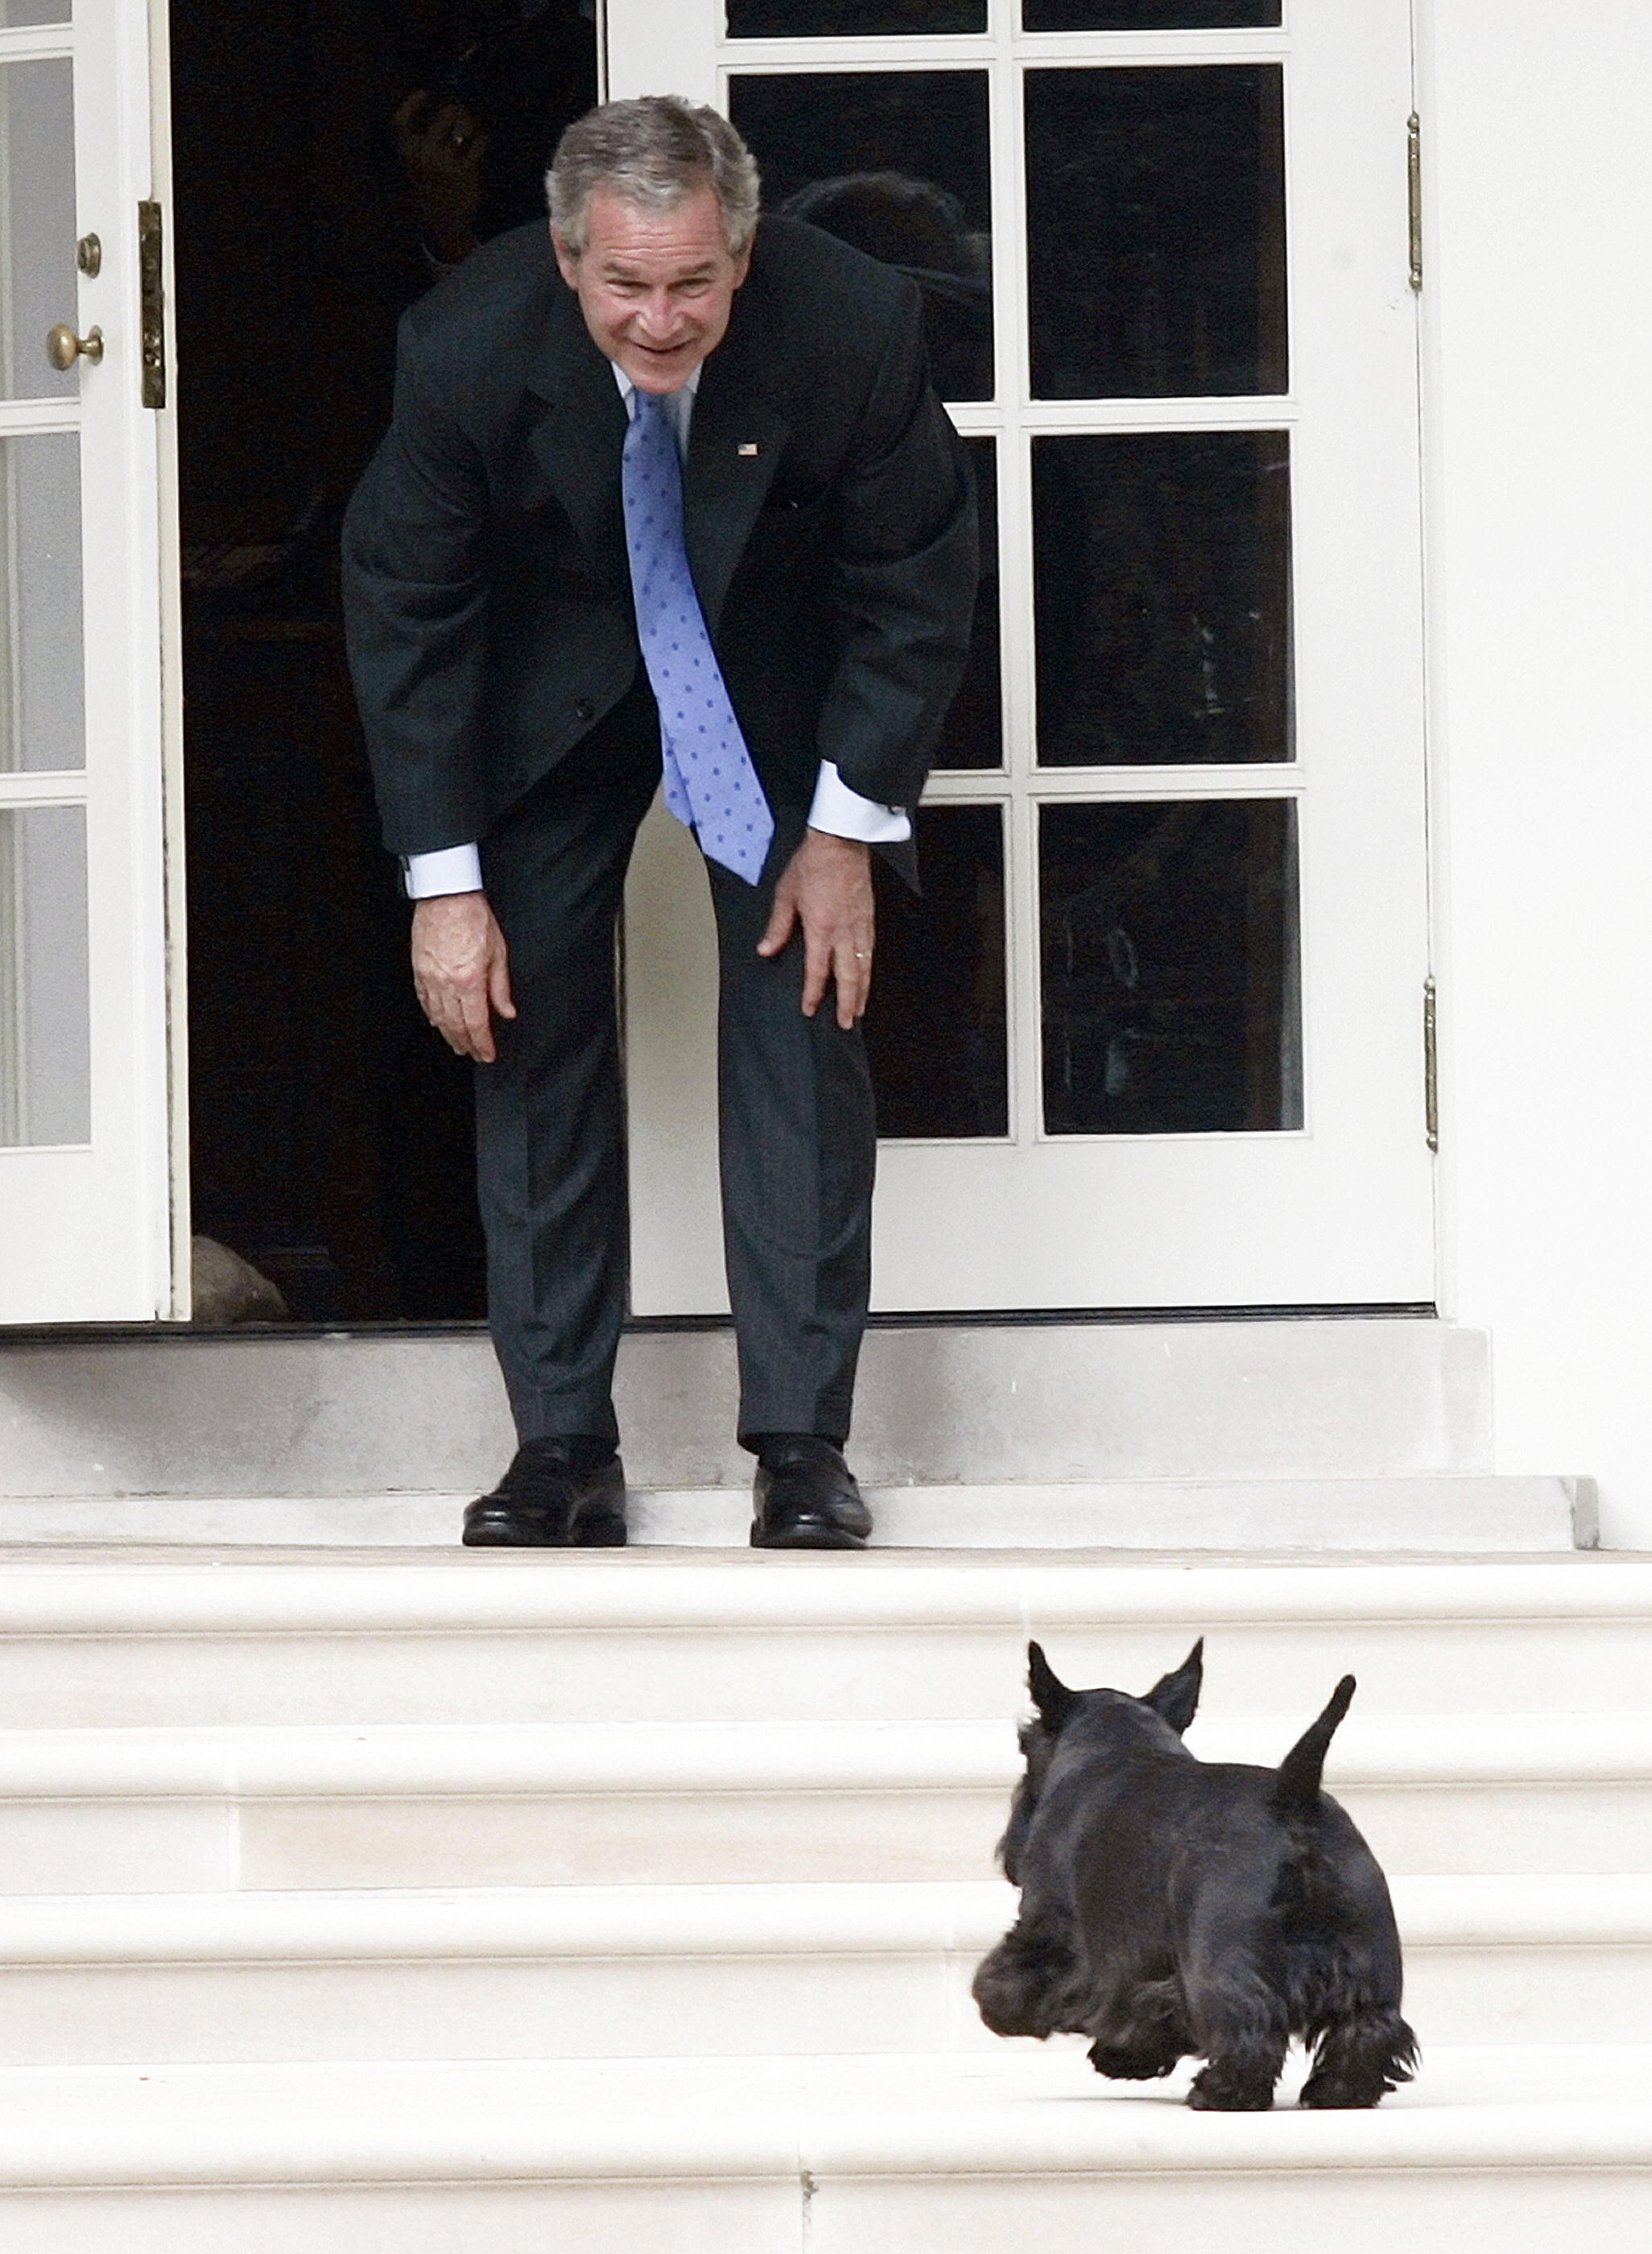 George W. Bush calls for his dog Barney as he stands on the West Wing Colonnade at the White House on Sept. 28, 2007.